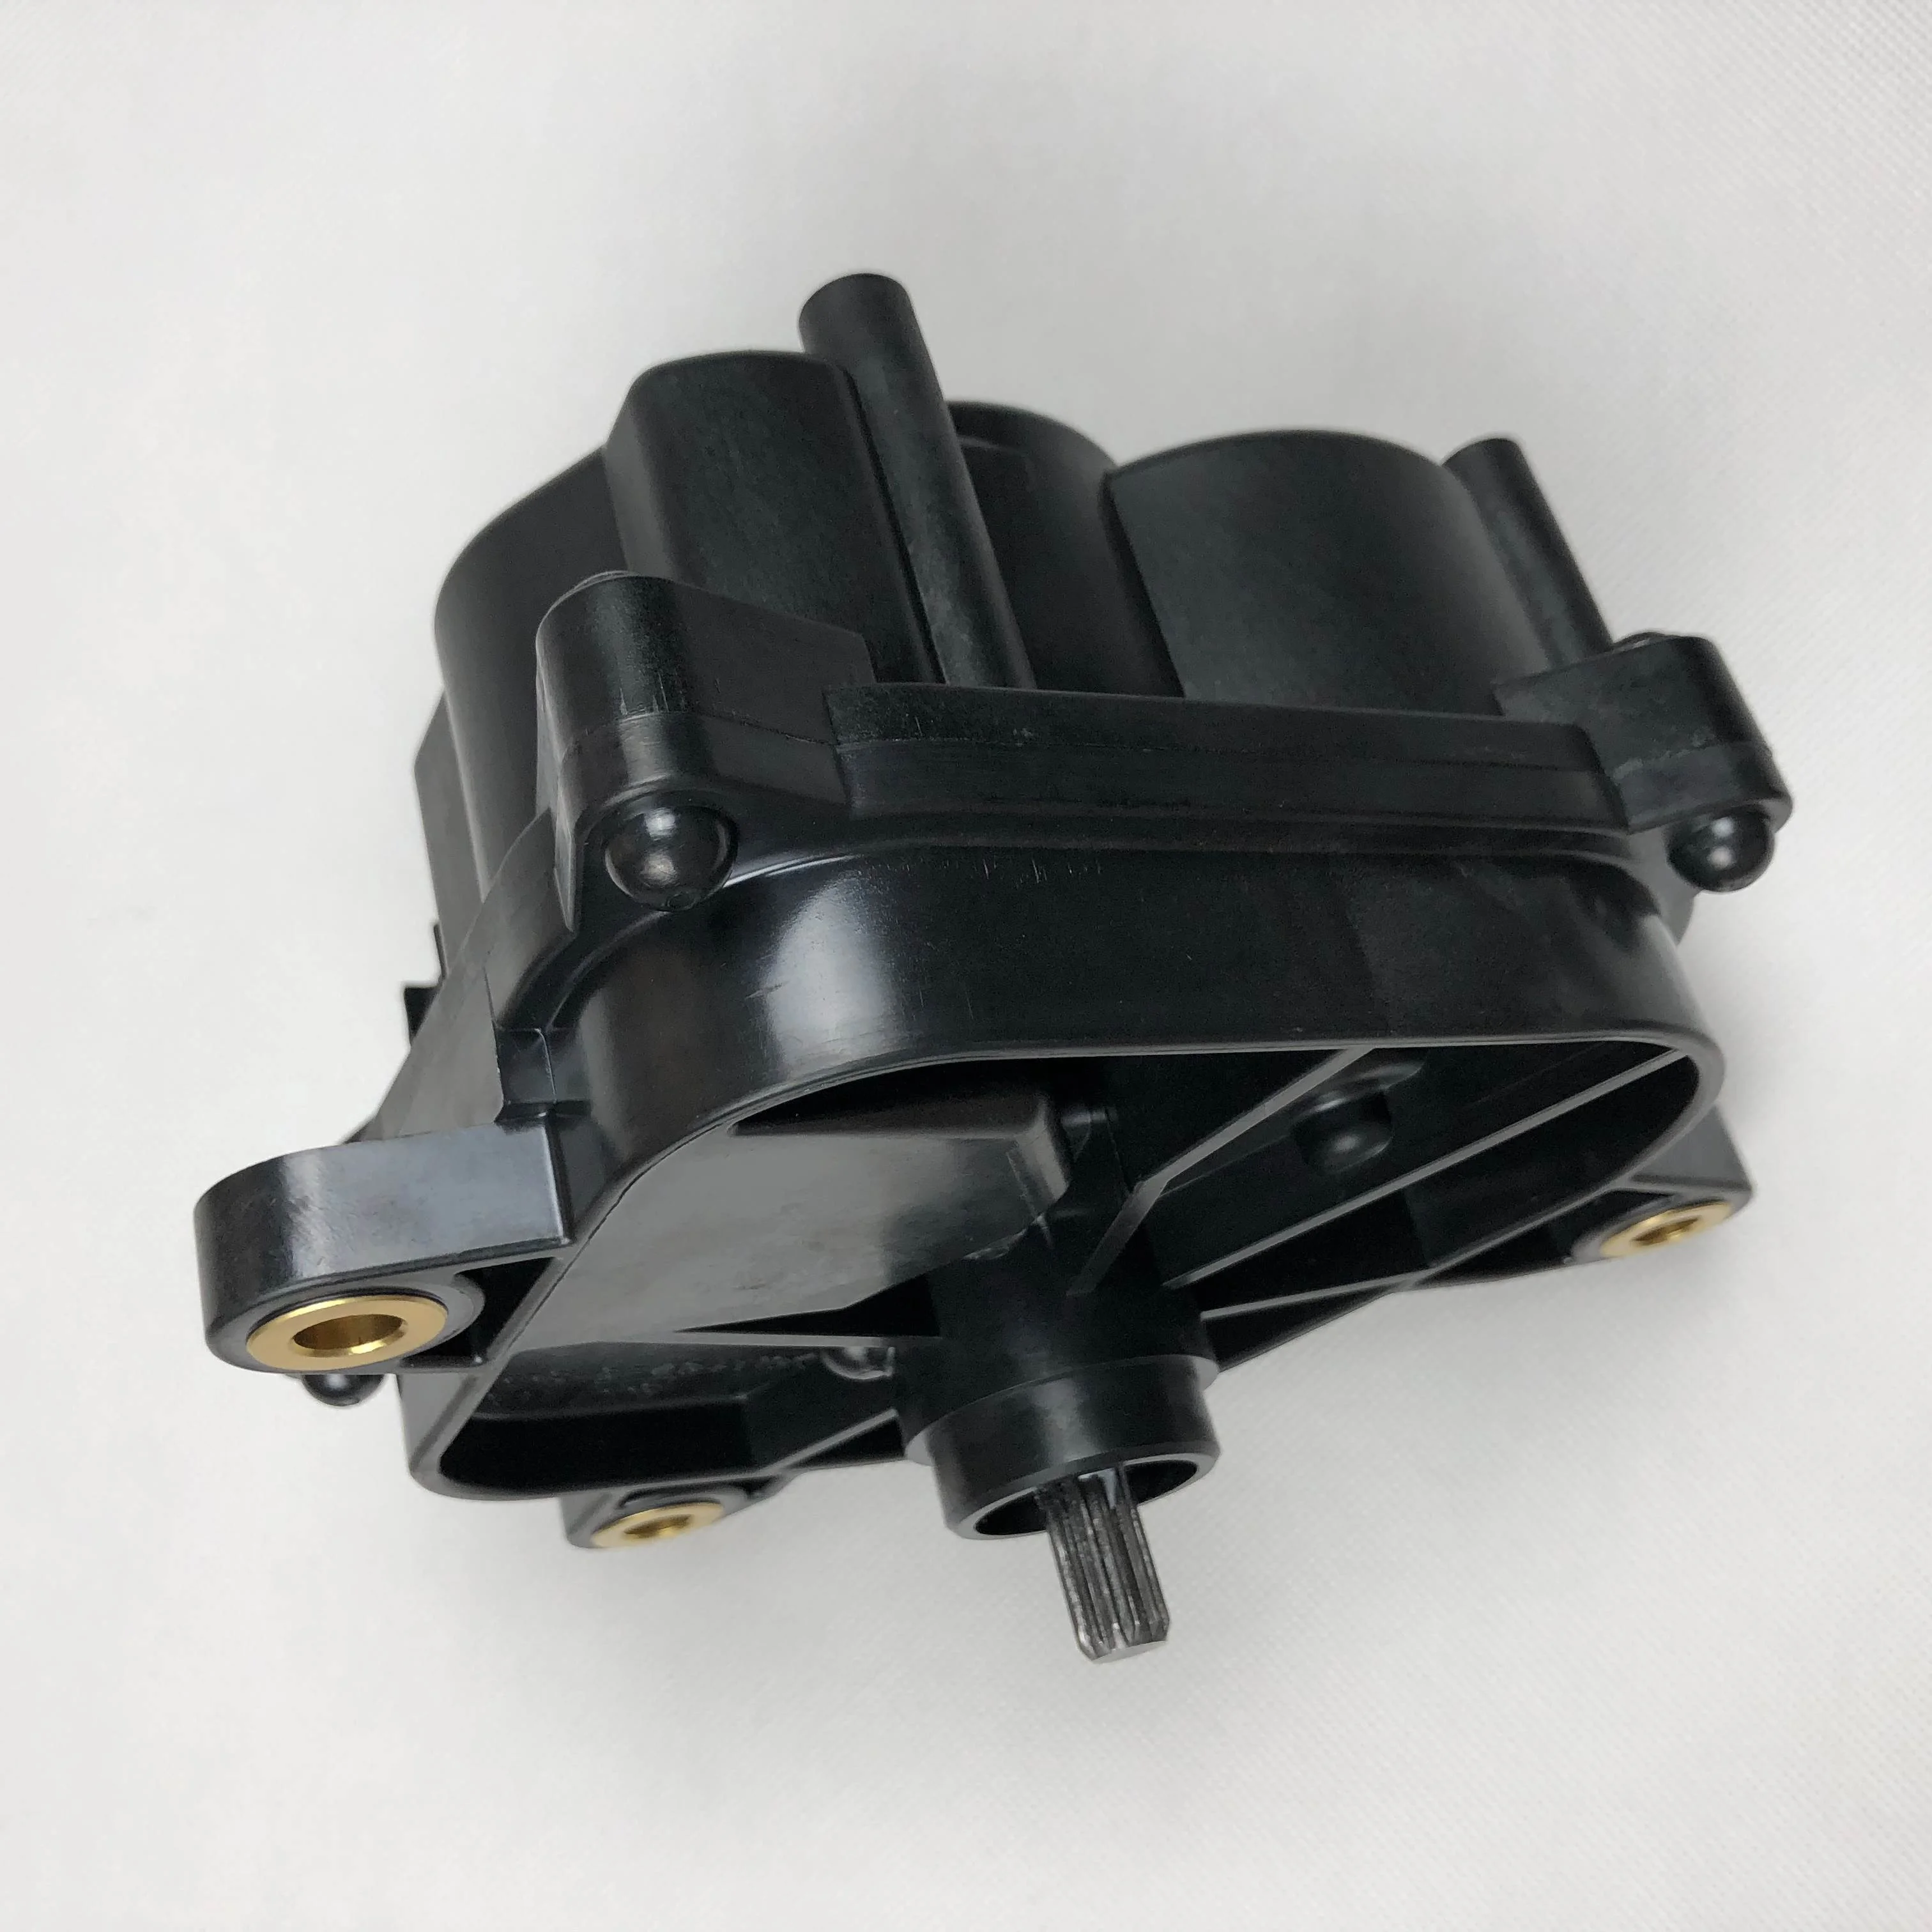 New 4wd Shift Actuator For Isuzu D-max 8-98196415-0 8981964150 8-97366626-0  8973666260 - Buy 4wd Actuator,D-max Actuator,Differential Actuator Product  on Alibaba.com